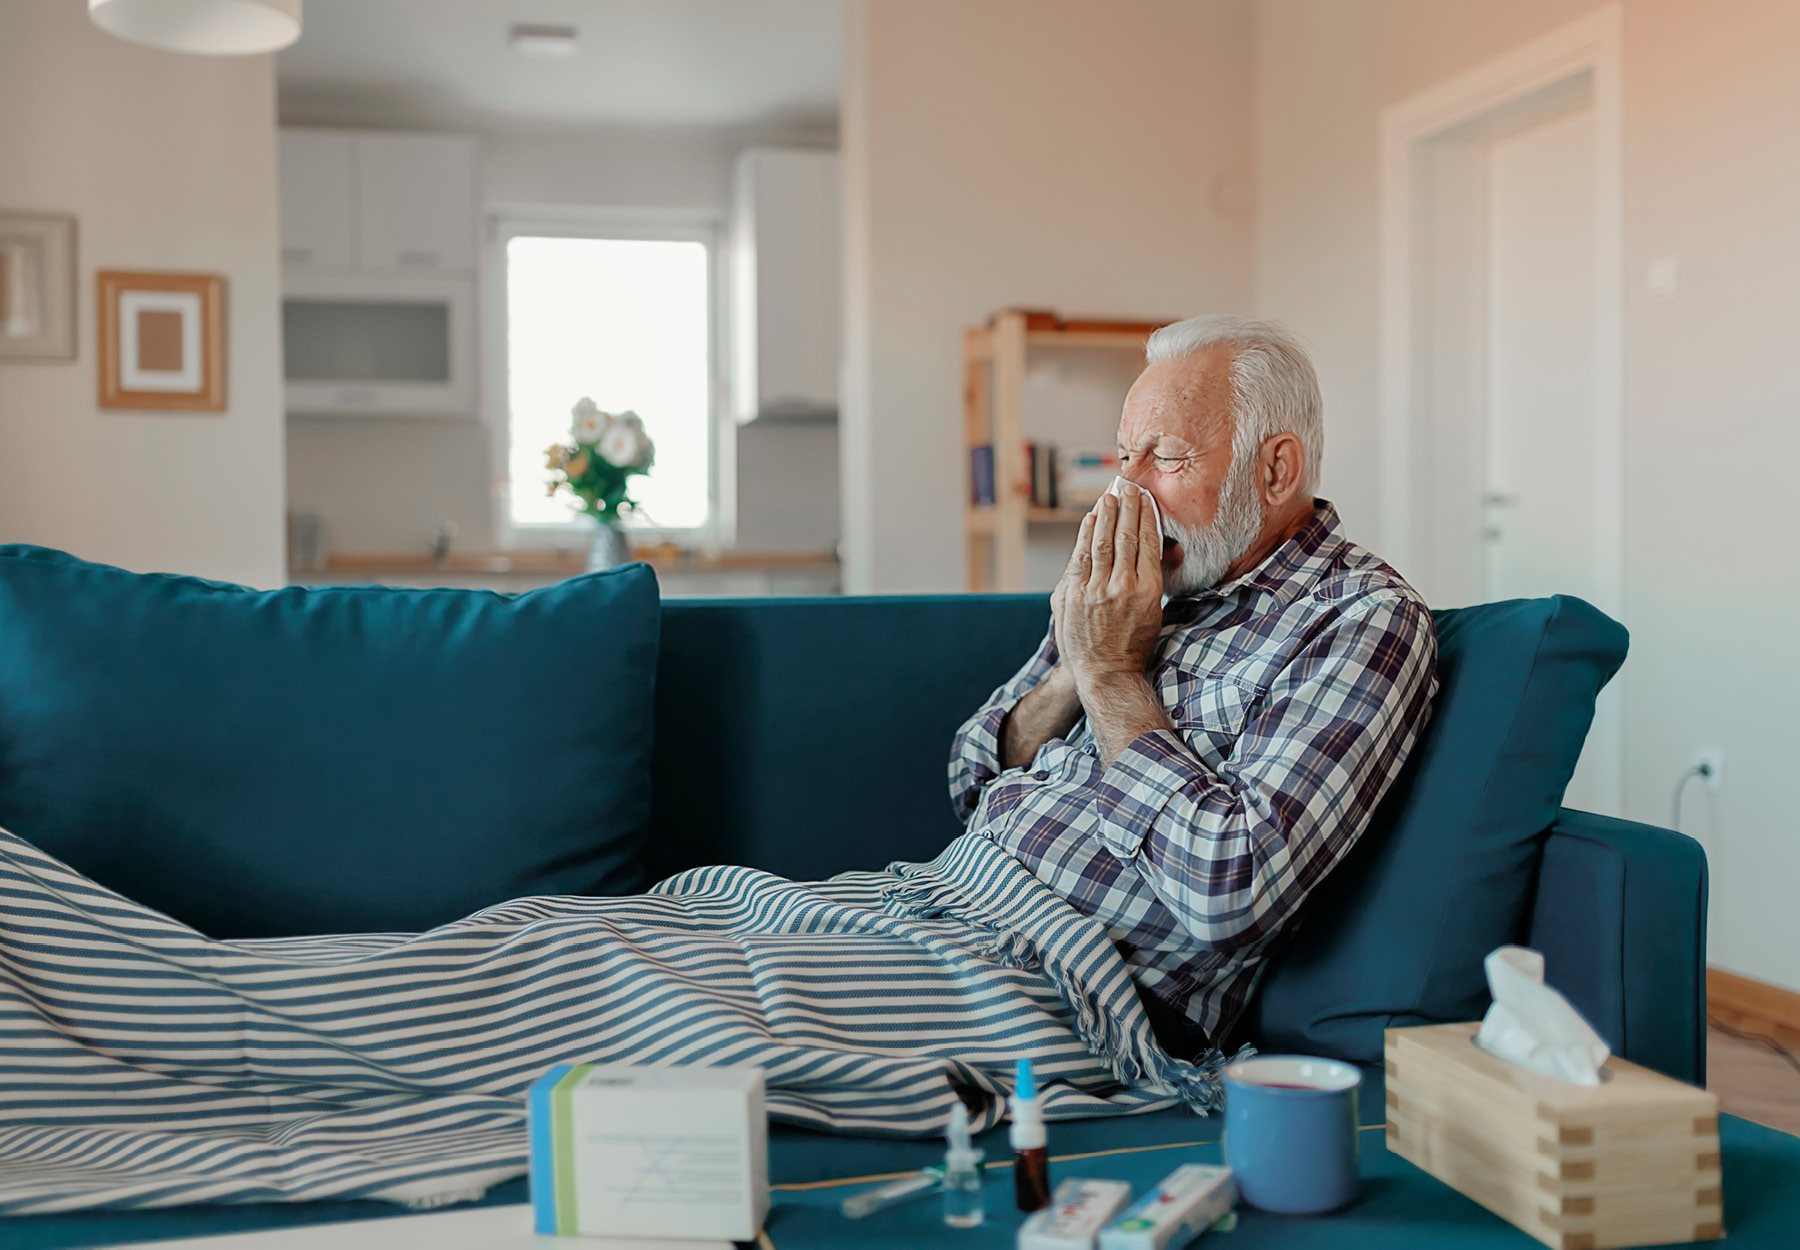 An elderly man sitting on the couch and blowing his nose.